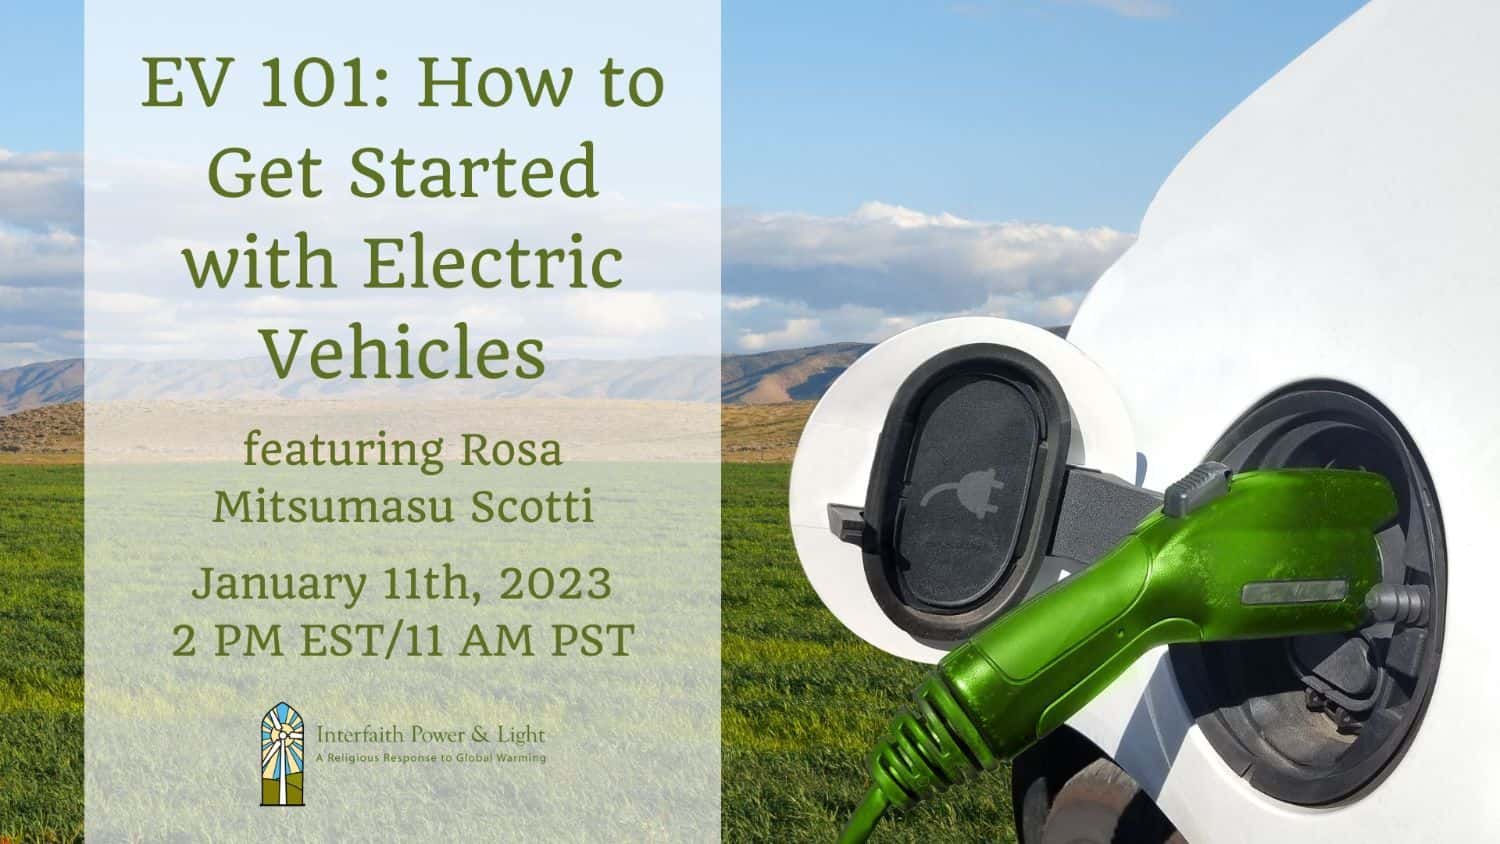 A photo of an electric car being charged, with the words "EV 101: How to Get Started with Electric Vehicles featuring Rosa Mitsumasu Scotti January 11th, 2023 2pm EST/11am PST"